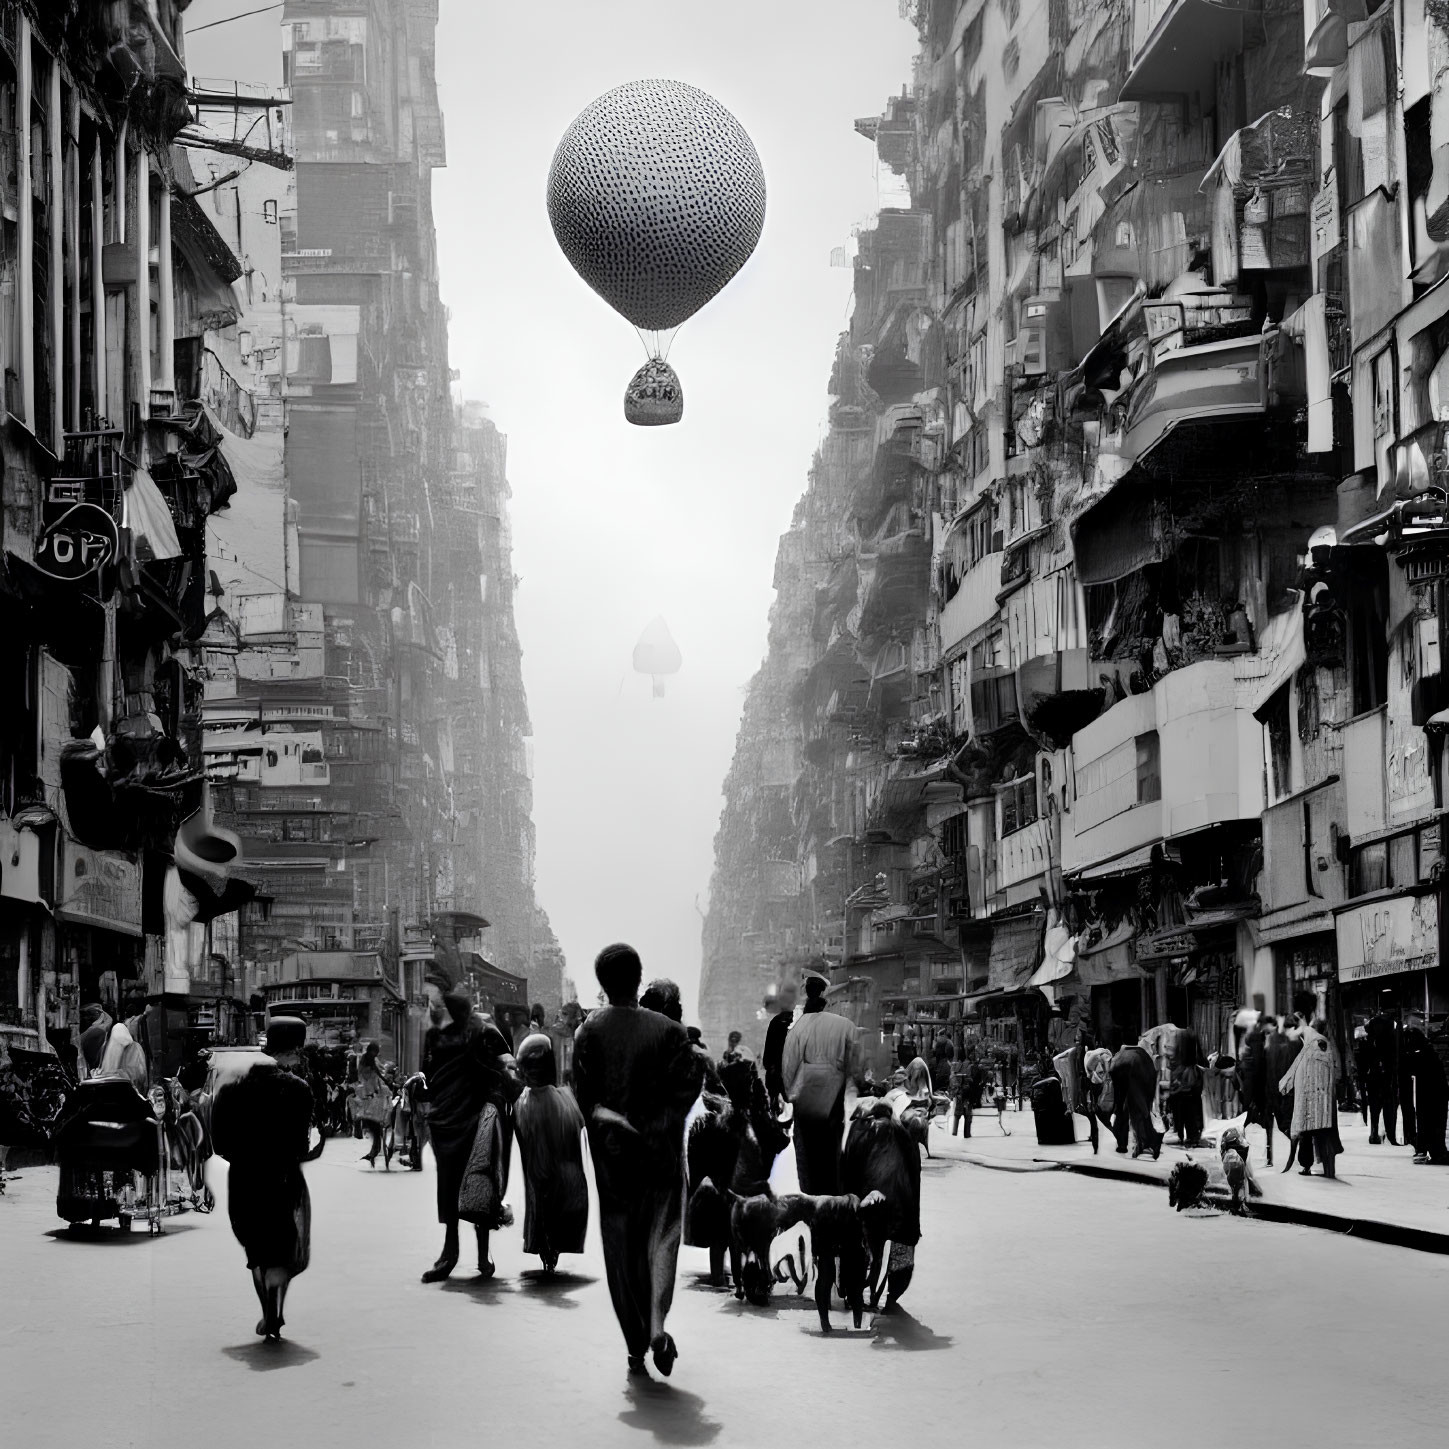 Monochrome cityscape with people, dogs, and floating sphere